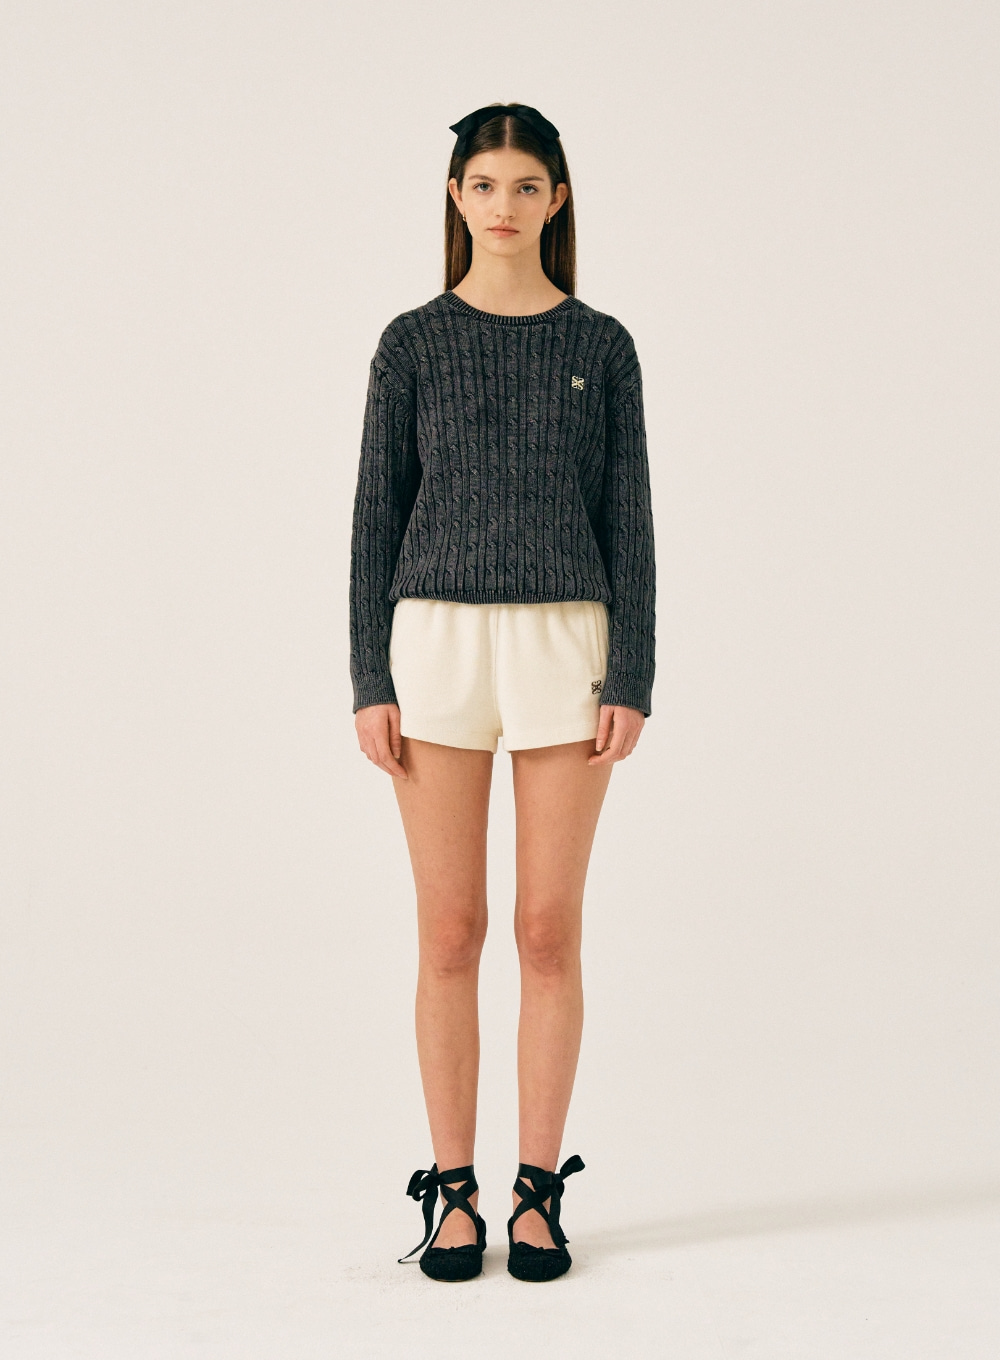 (W) Classic Dyed Cable Knit - Night Black